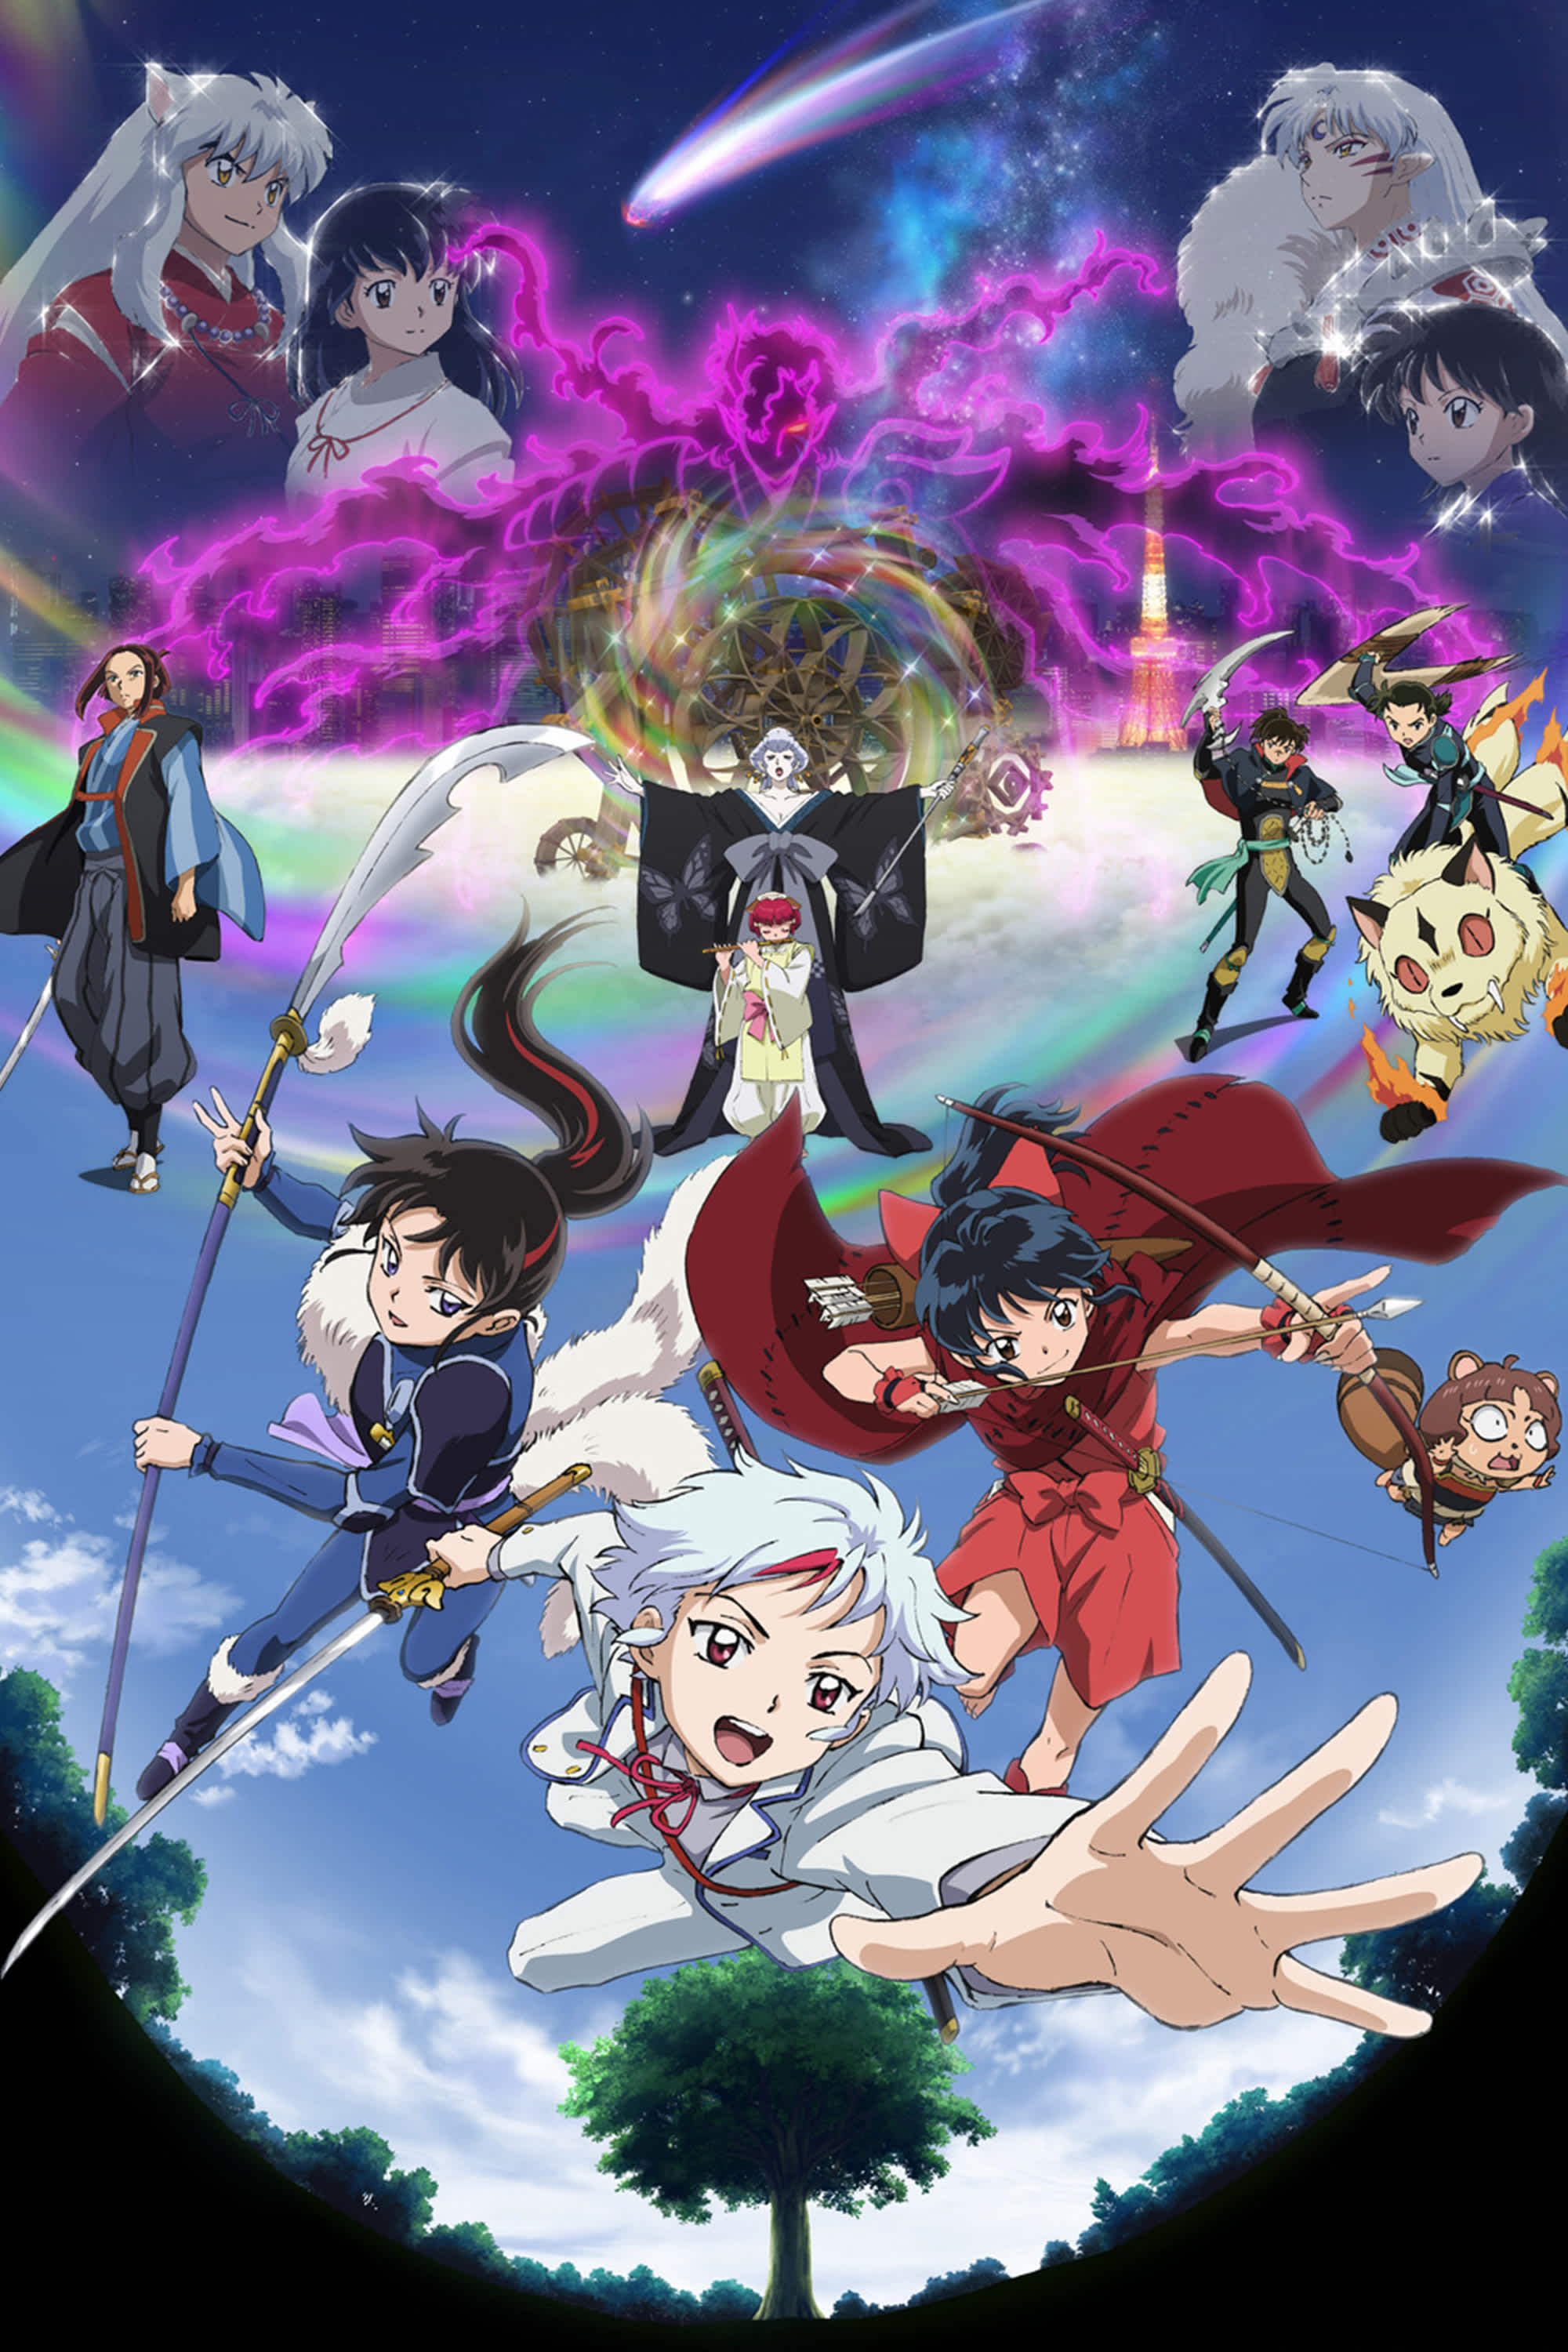 Funimation Announces Winter 2022 Anime Simulcast Slate with